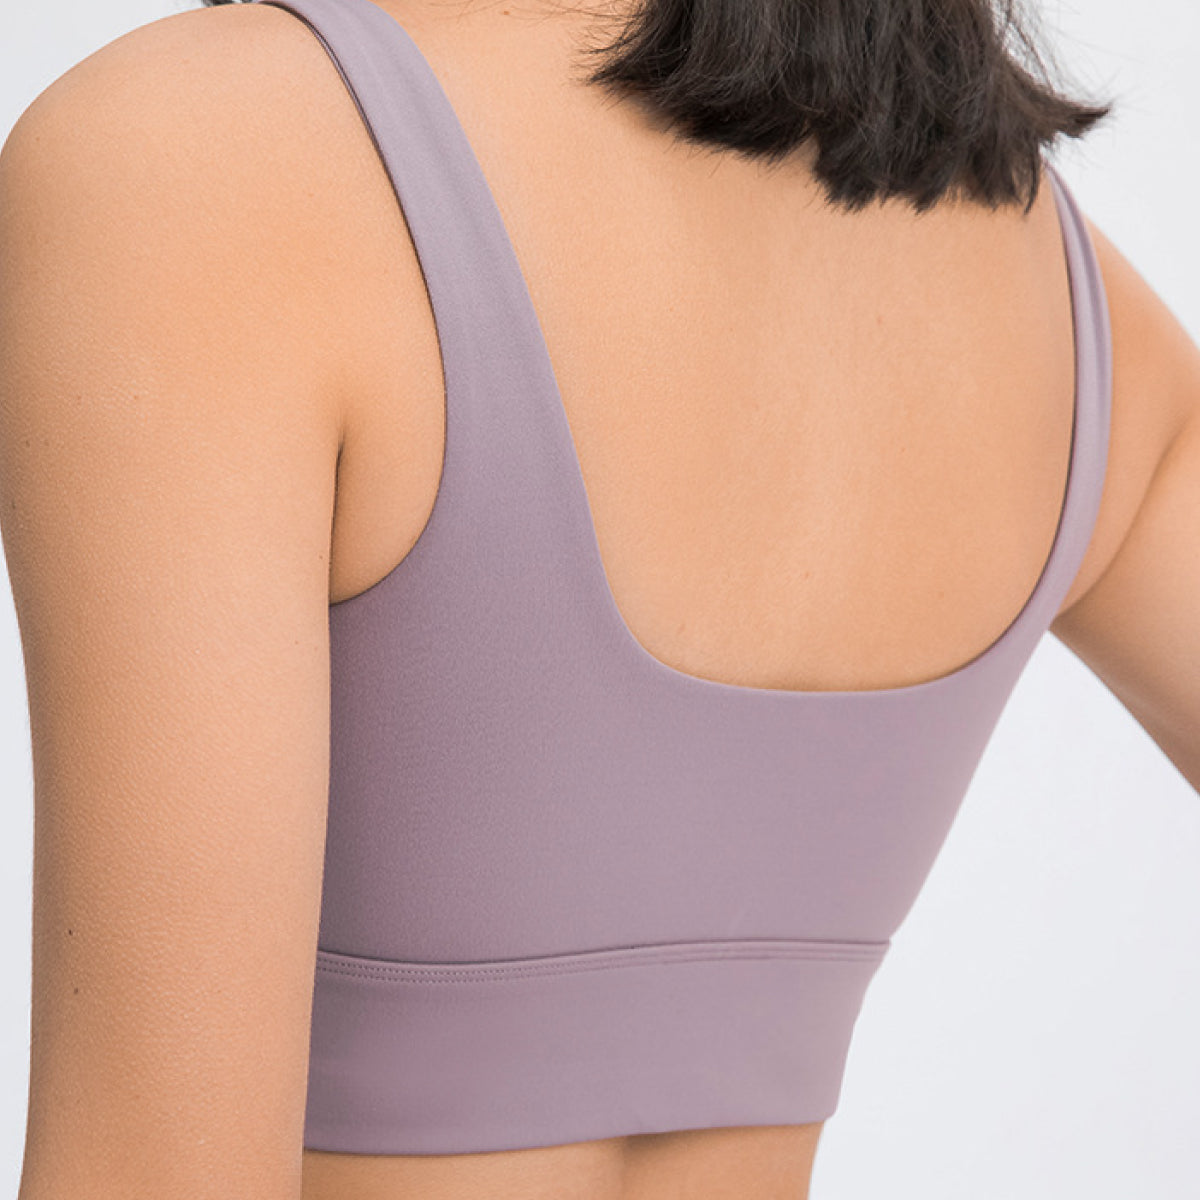 Scoop Neck and Back Women's Sports Bra